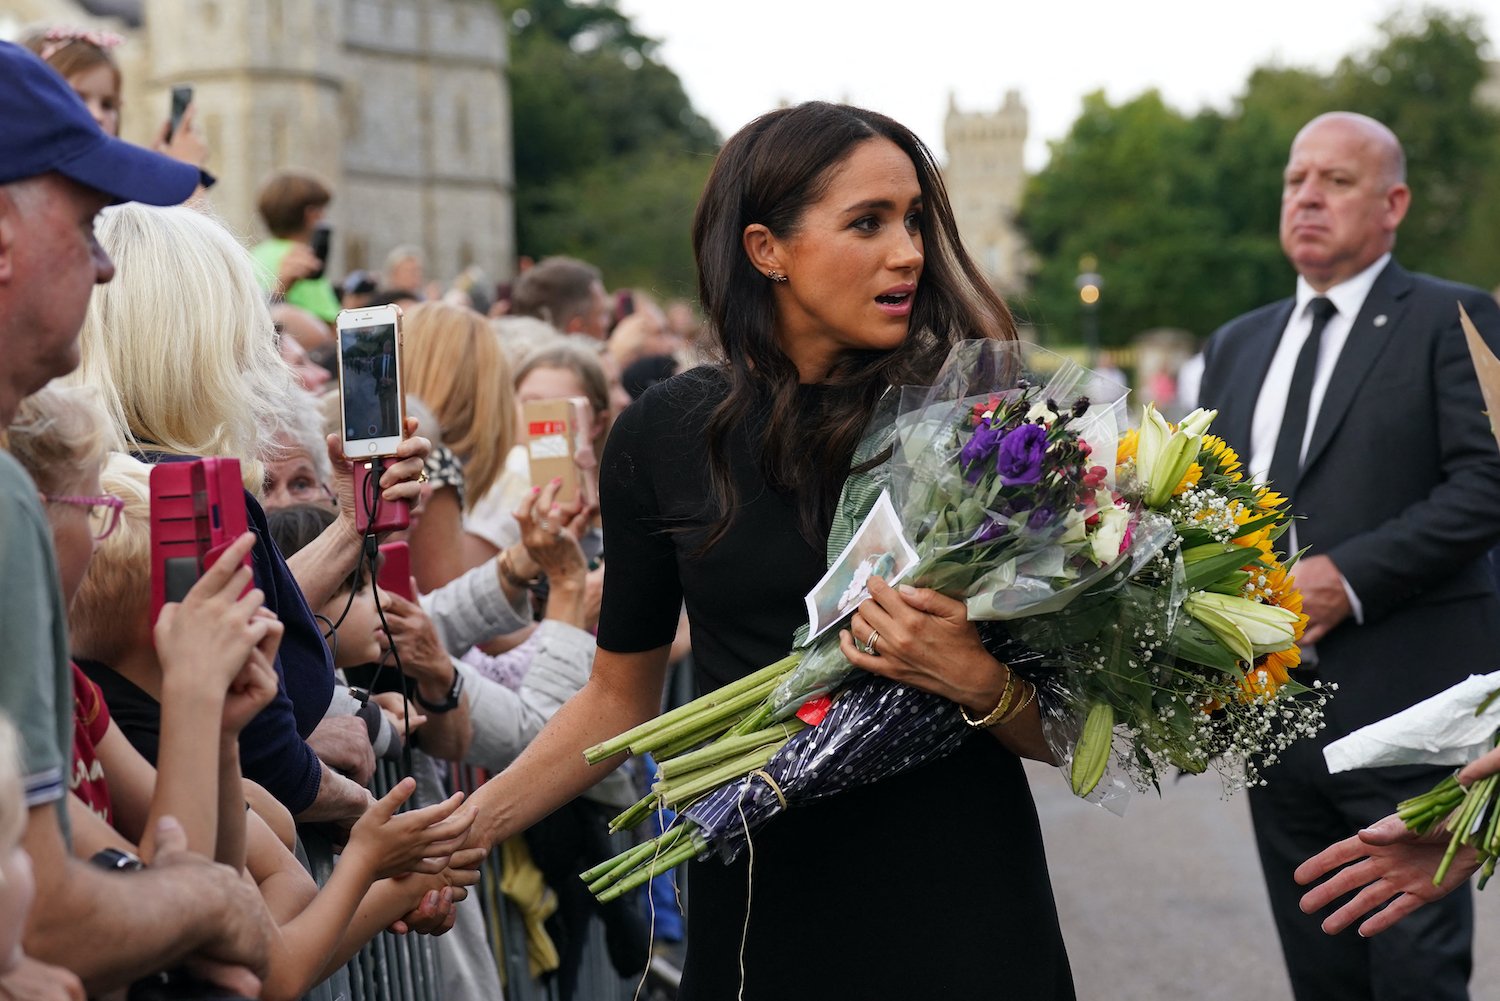 Meghan Markle holding flowers during walkabout at Windsor Castle body language appeared rude to some royal watchers